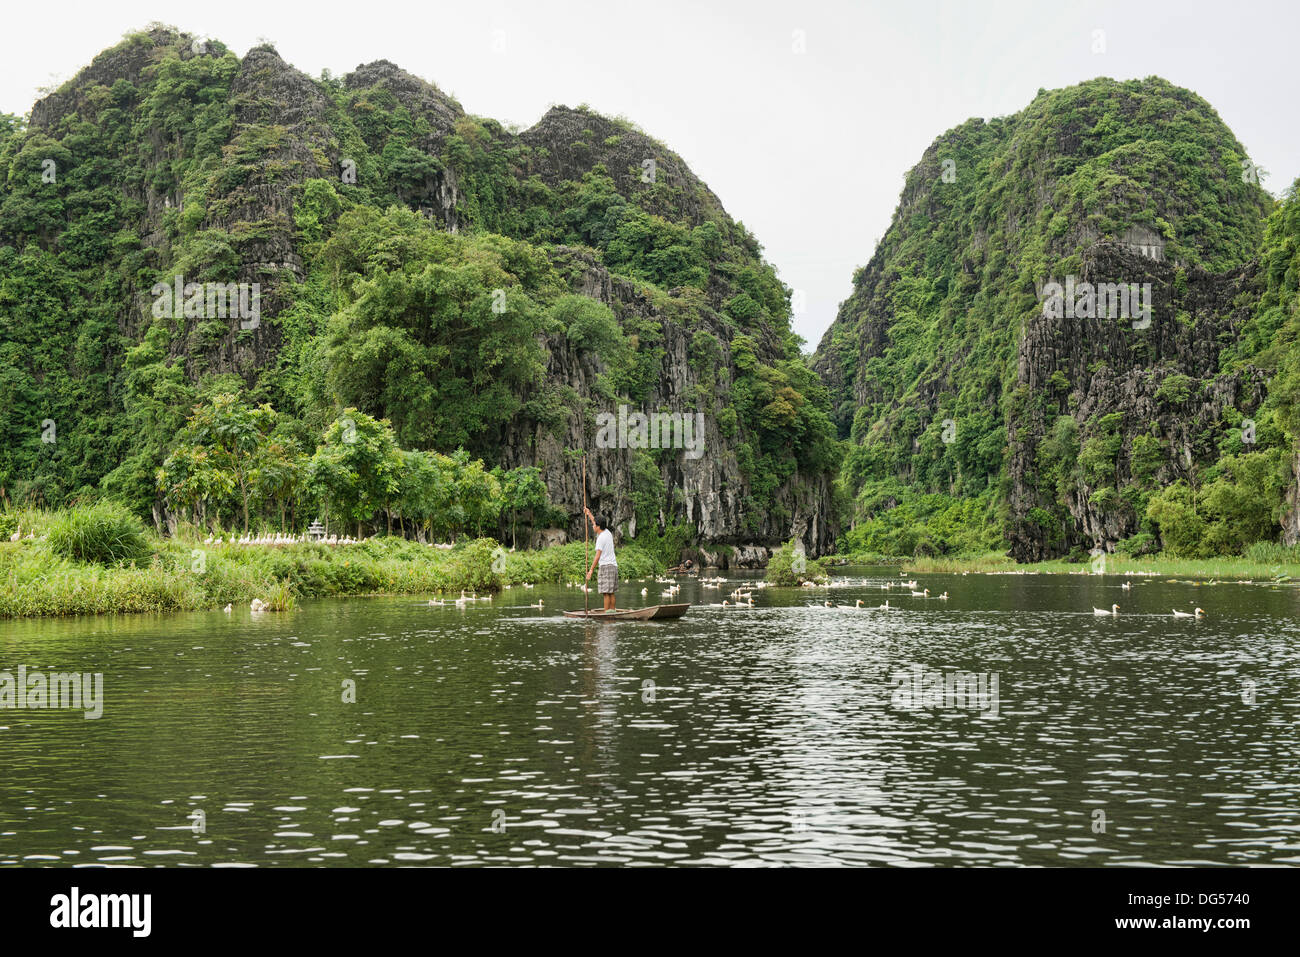 sightseeing on the Tam Coc River in Ninh Binh, Vietnam Stock Photo